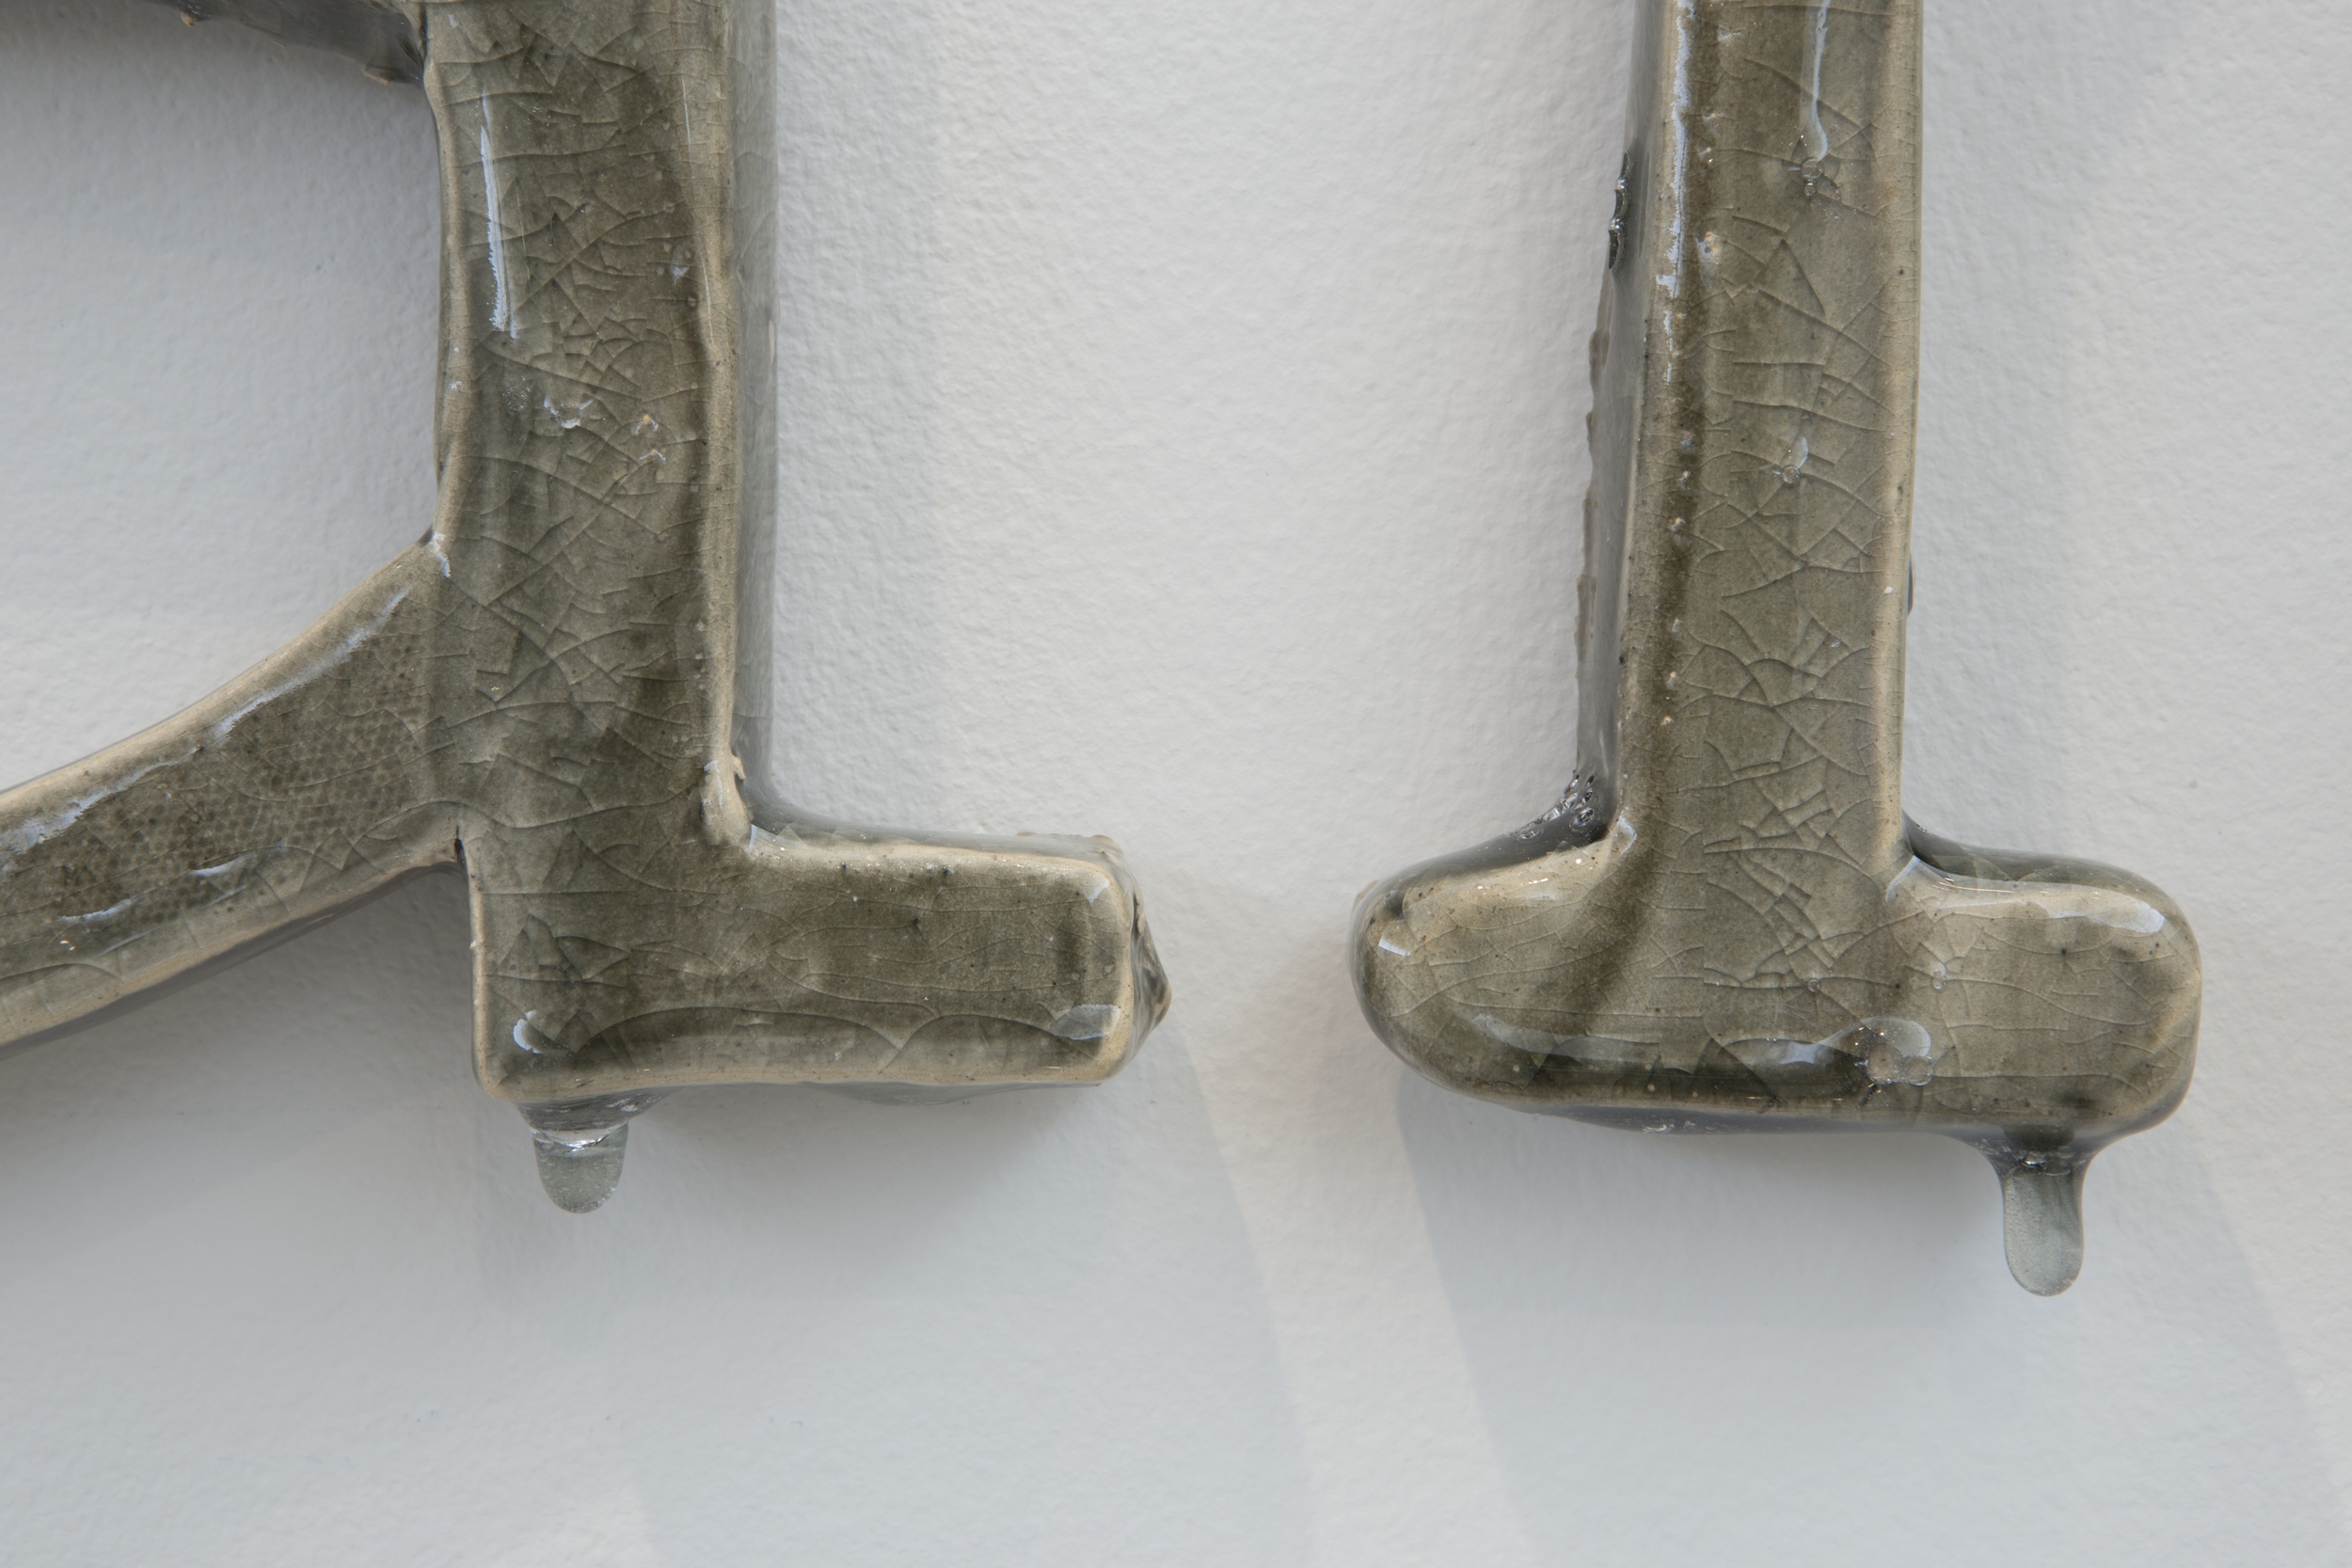   Alphabets and Earth: The Clay Letters , glazed earthenware, dimensions variable, 2015. 